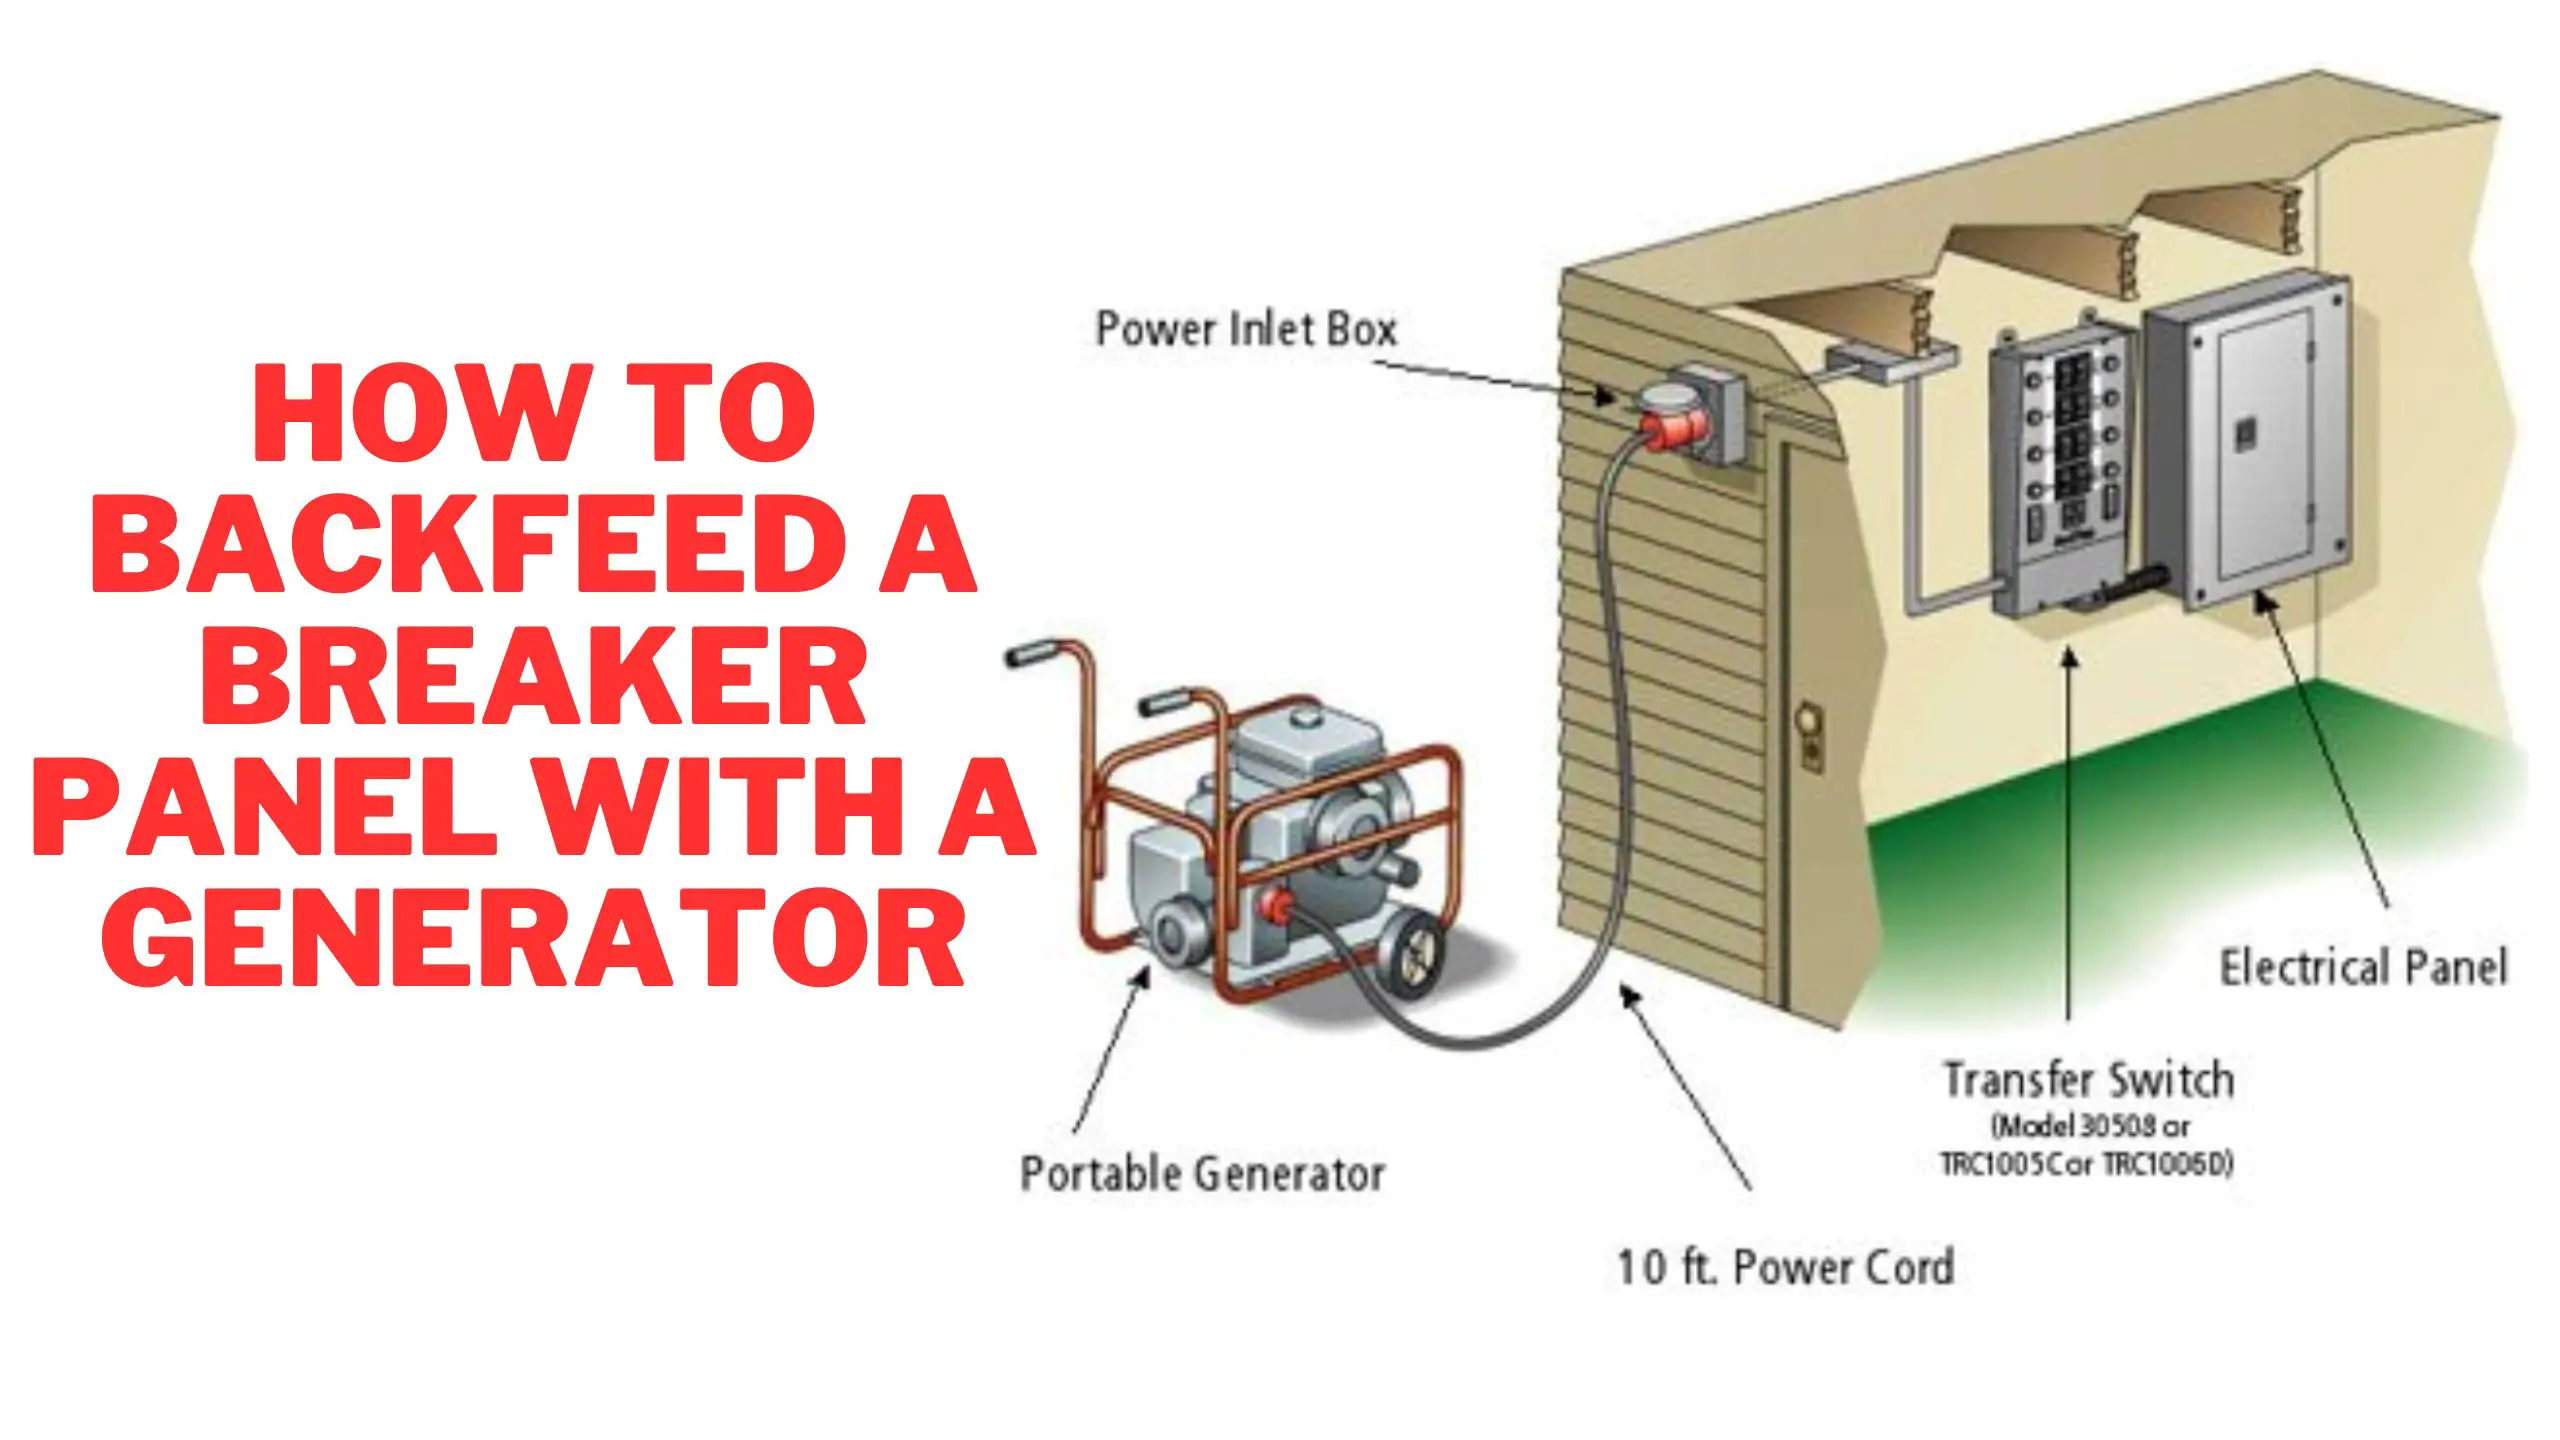 How to Backfeed a Breaker Panel with a Generator